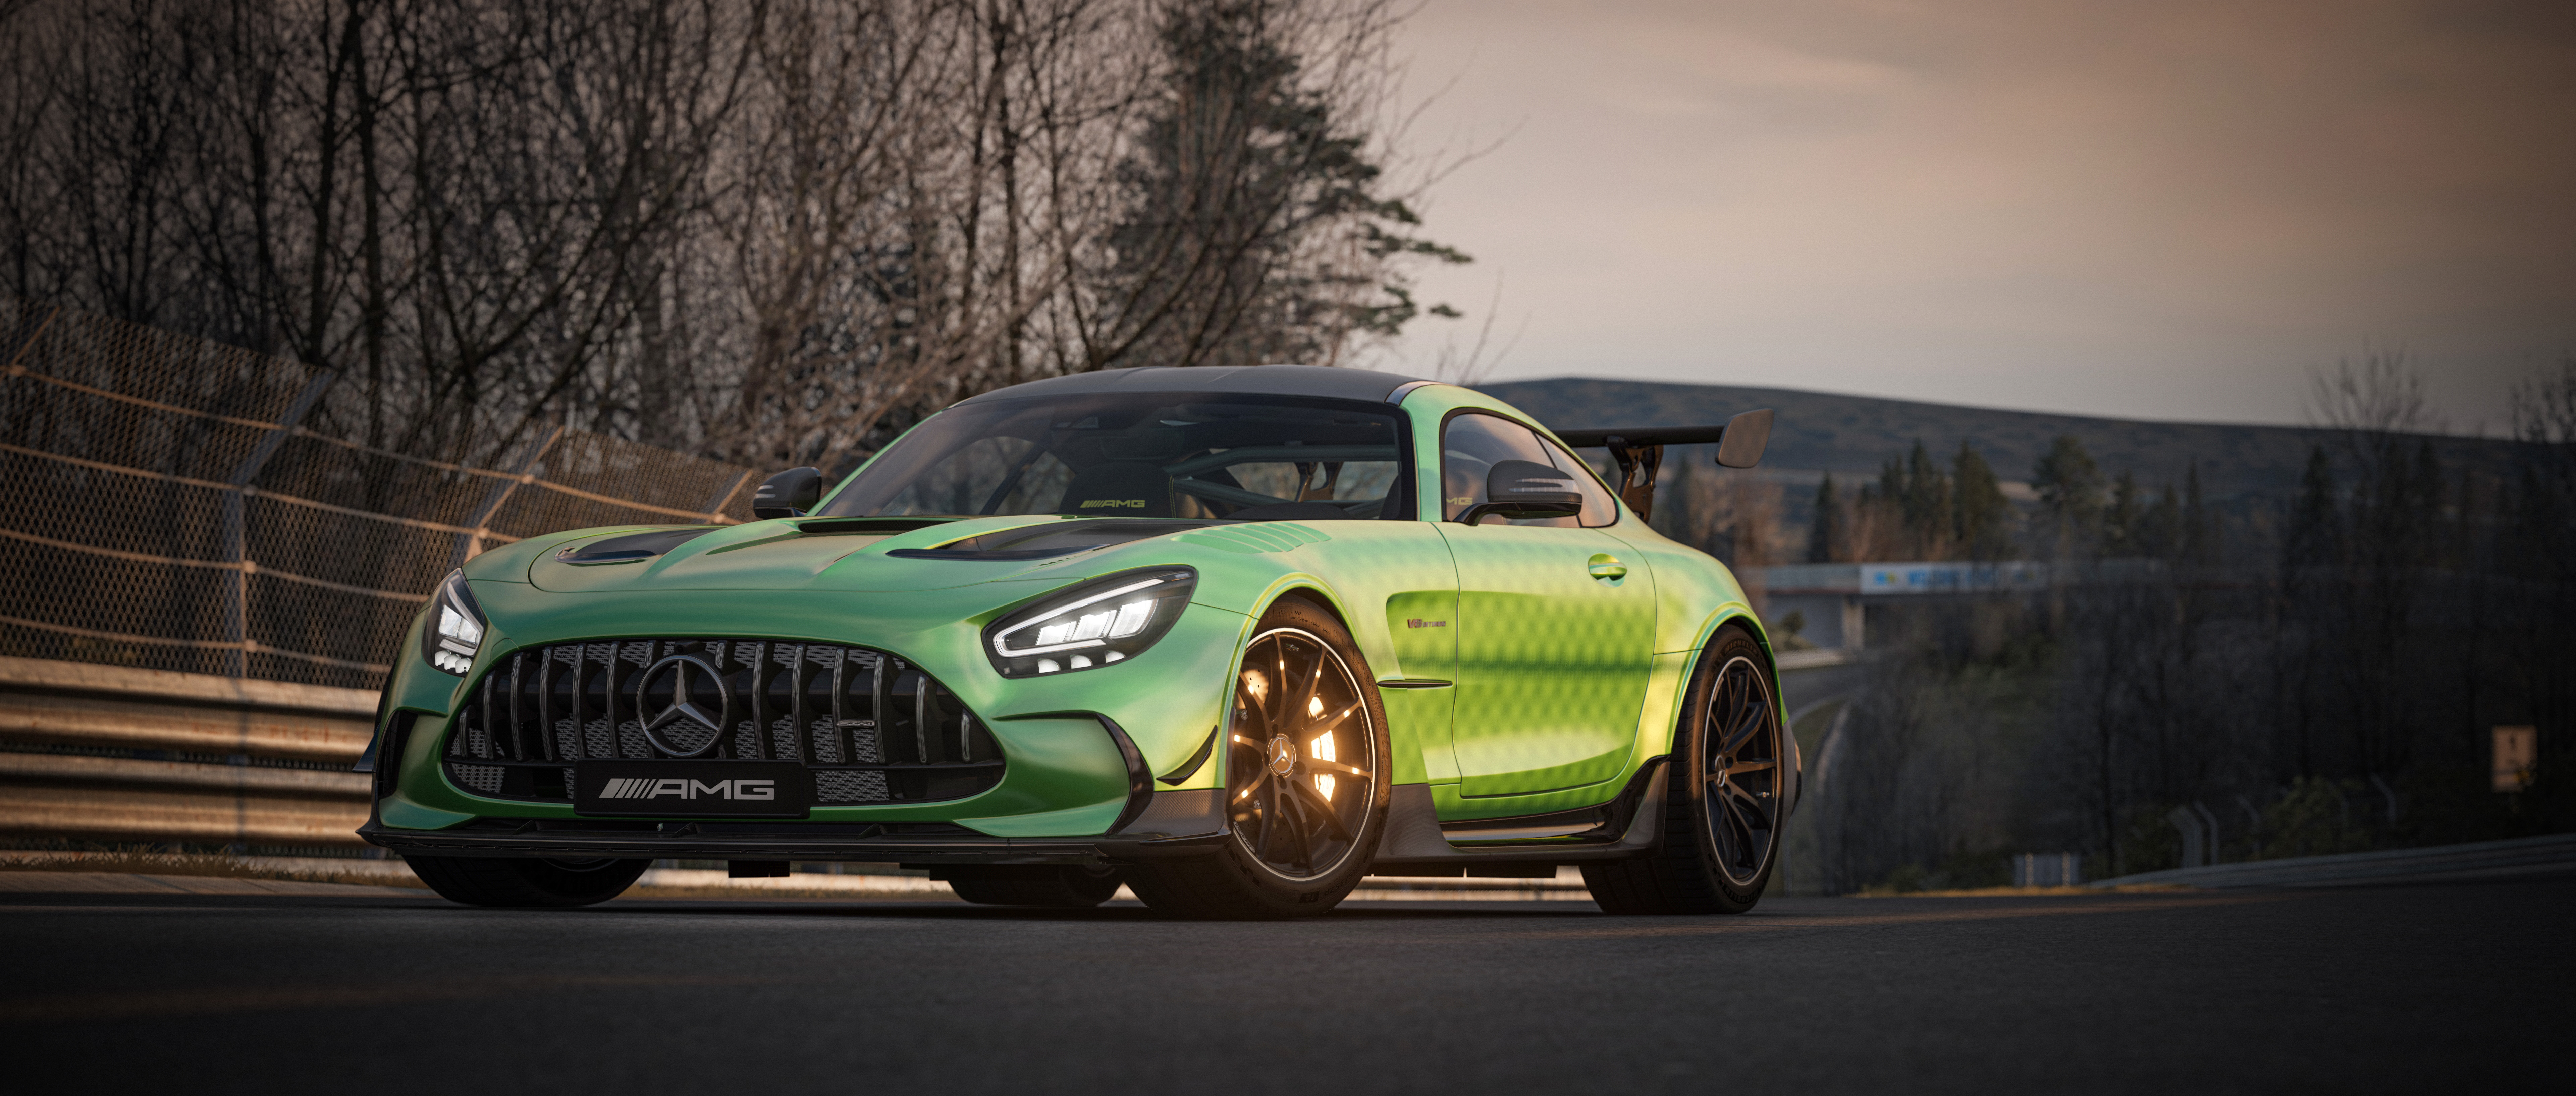 General 7680x3269 AMG GT Nurburgring Assetto Corsa car PC gaming vehicle frontal view headlights video game art screen shot video games fence CGI sky sunlight